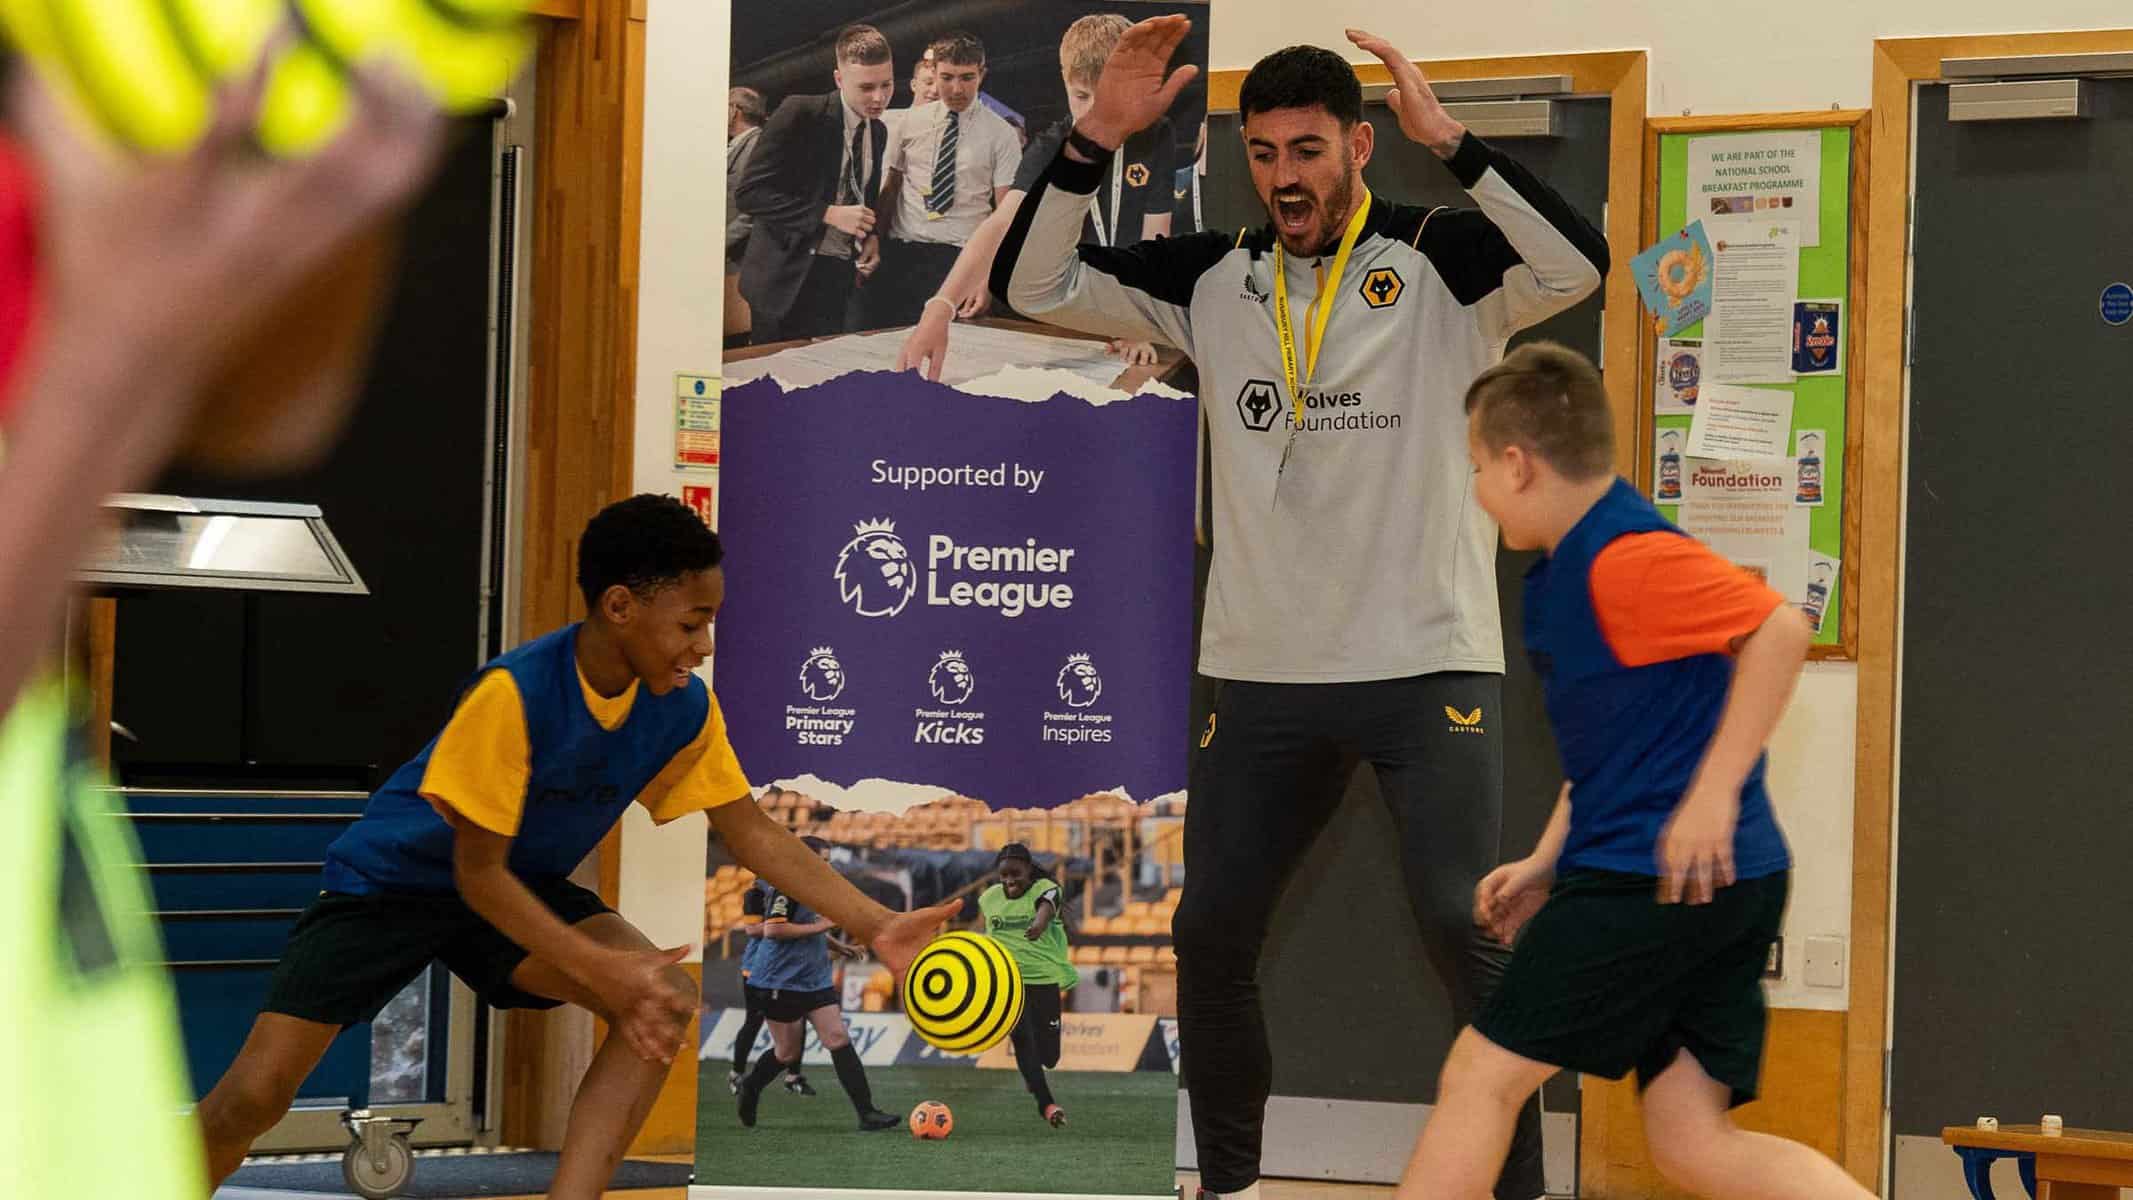 Premier League Primary Stars: Foundation supporting children across Wolverhampton Image